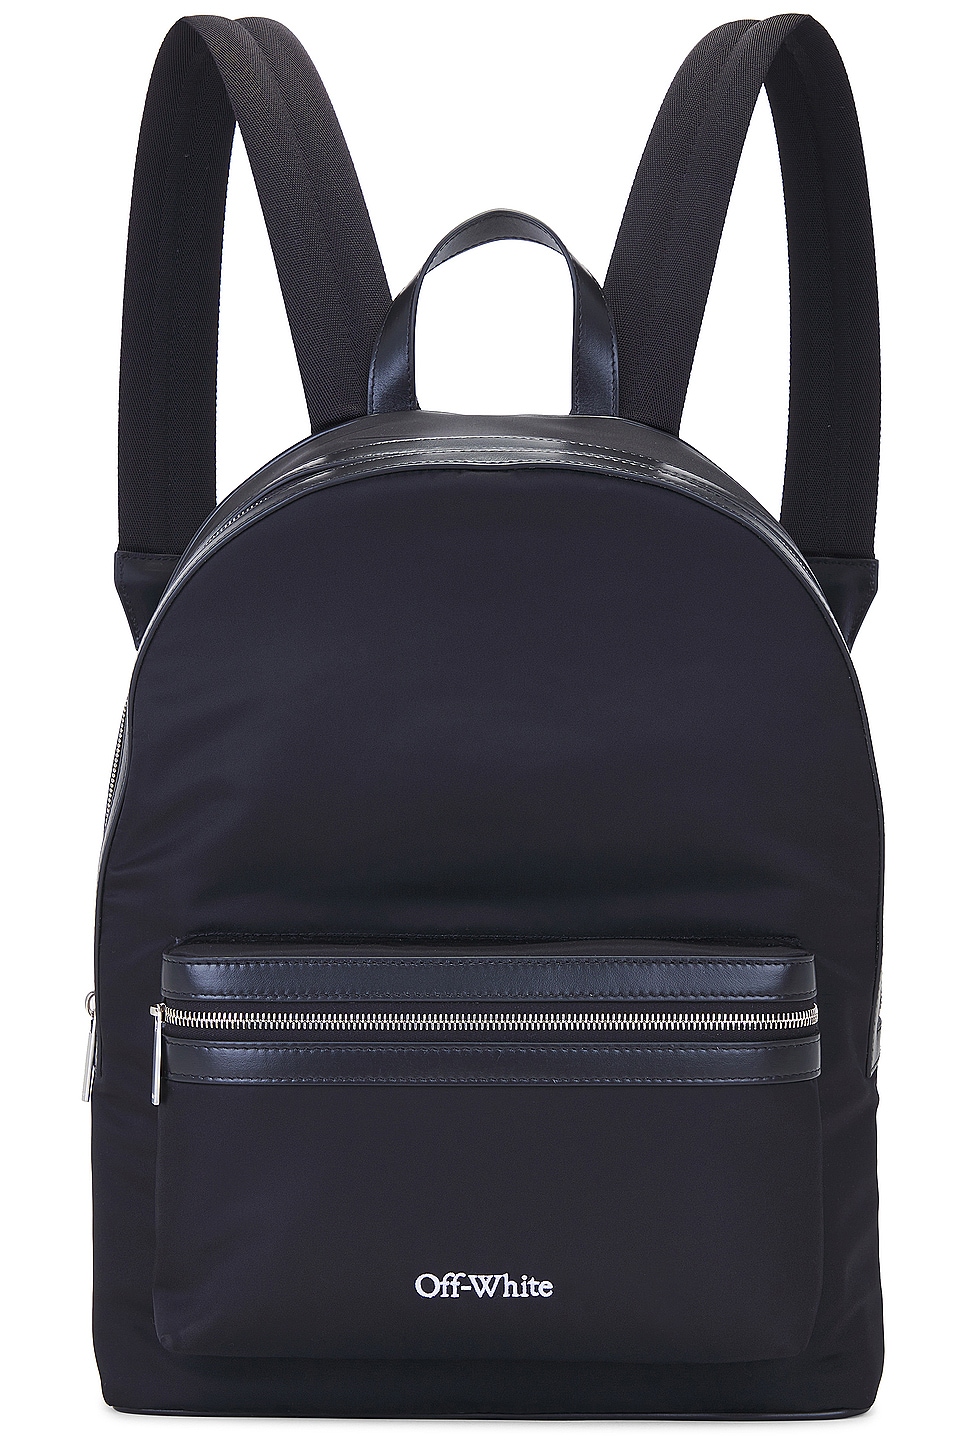 Core Round Nylon Backpack in Black